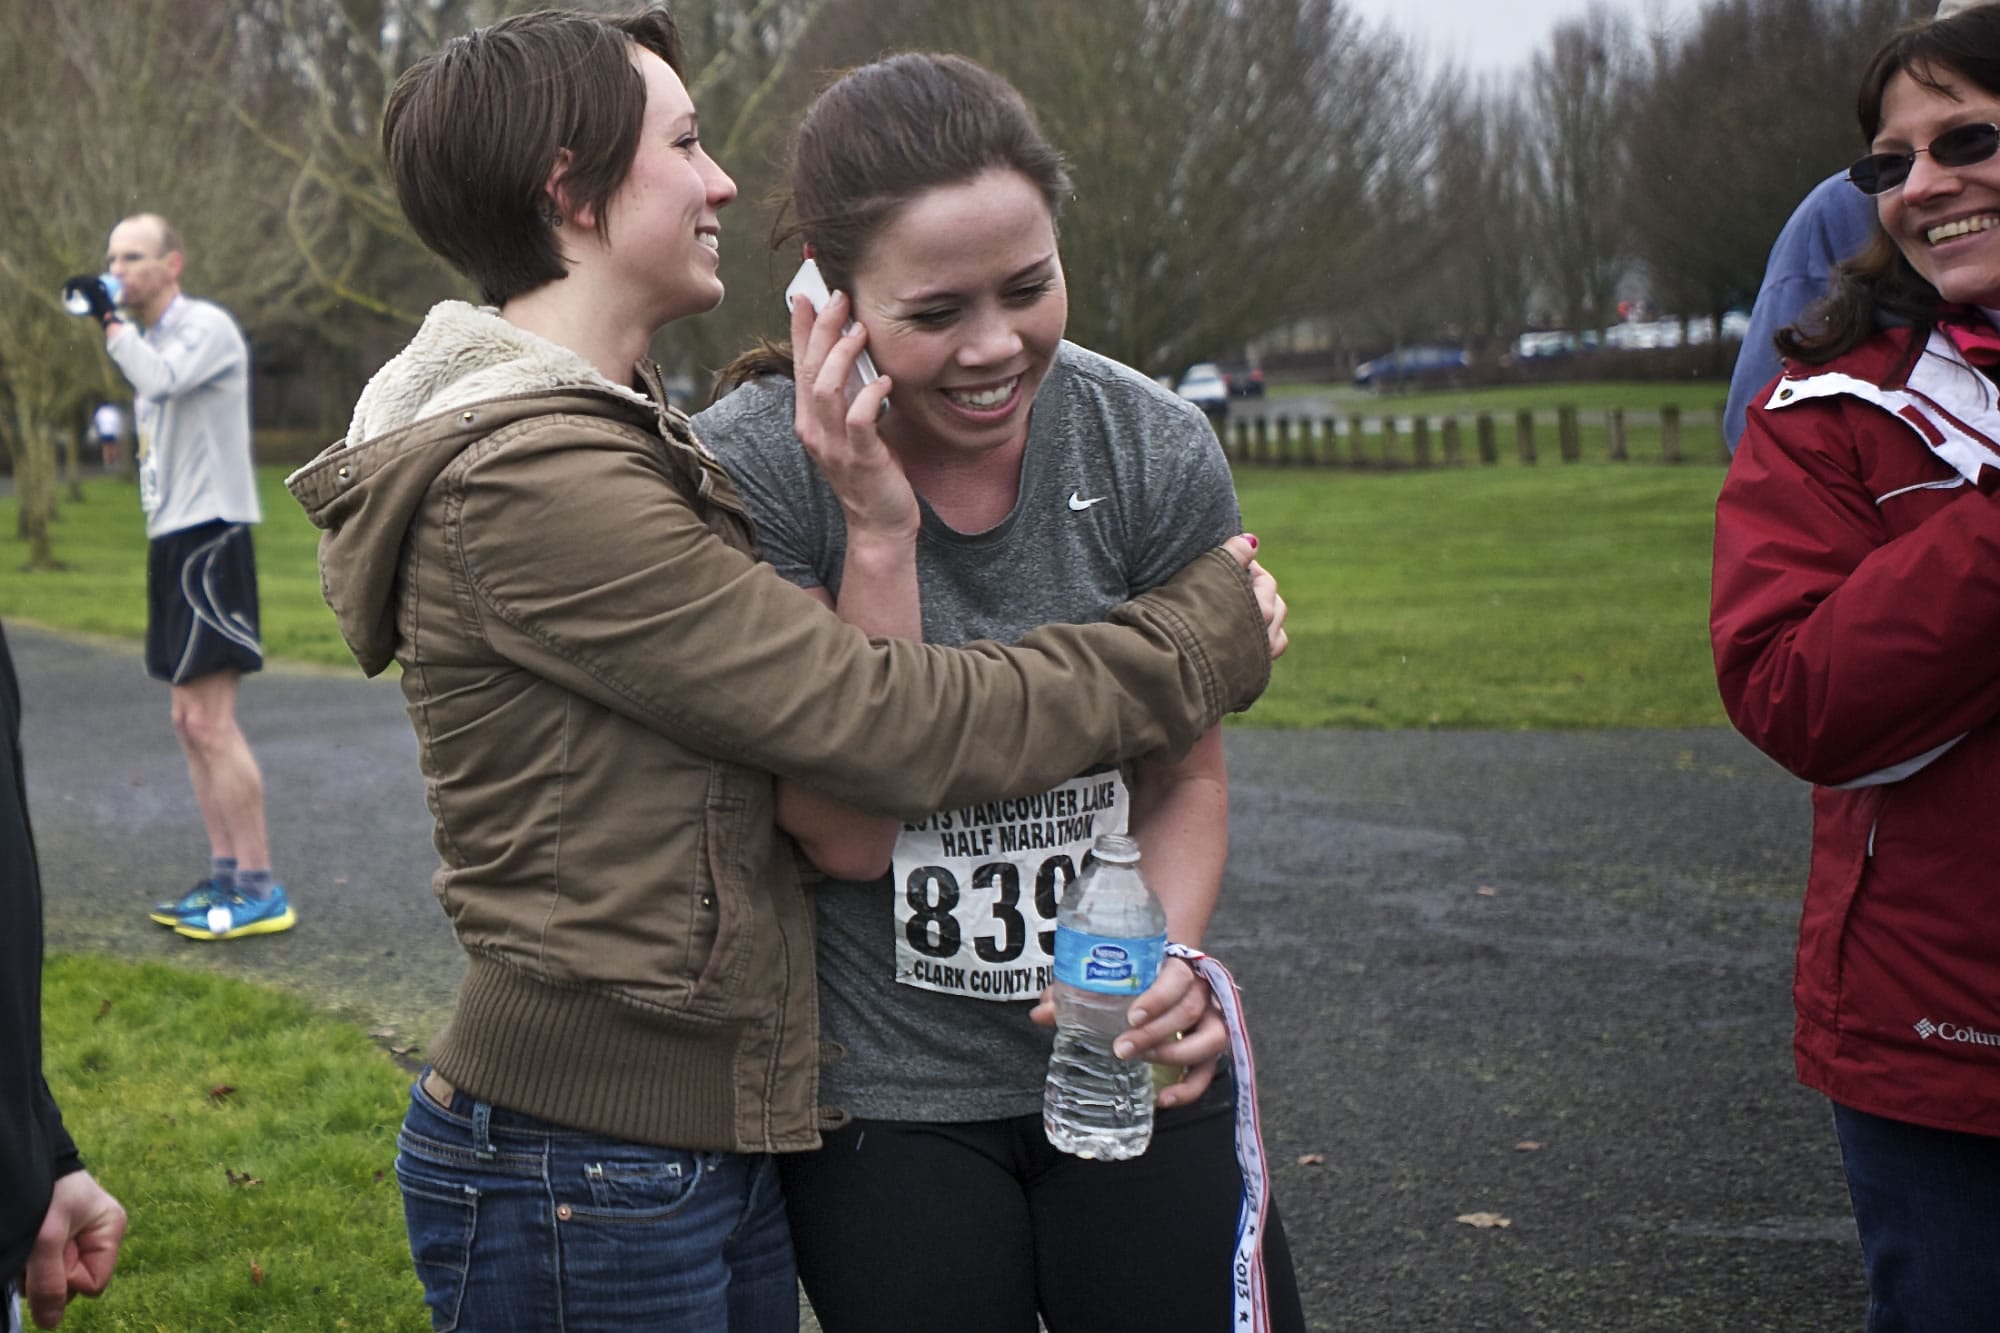 Shannon Porter gets a hug from her sister Georgia Porter while talking on the phone with her other sister Sarah Crouch at the finish line of the Vancouver Lake Half Marathon after finishing first for the women.